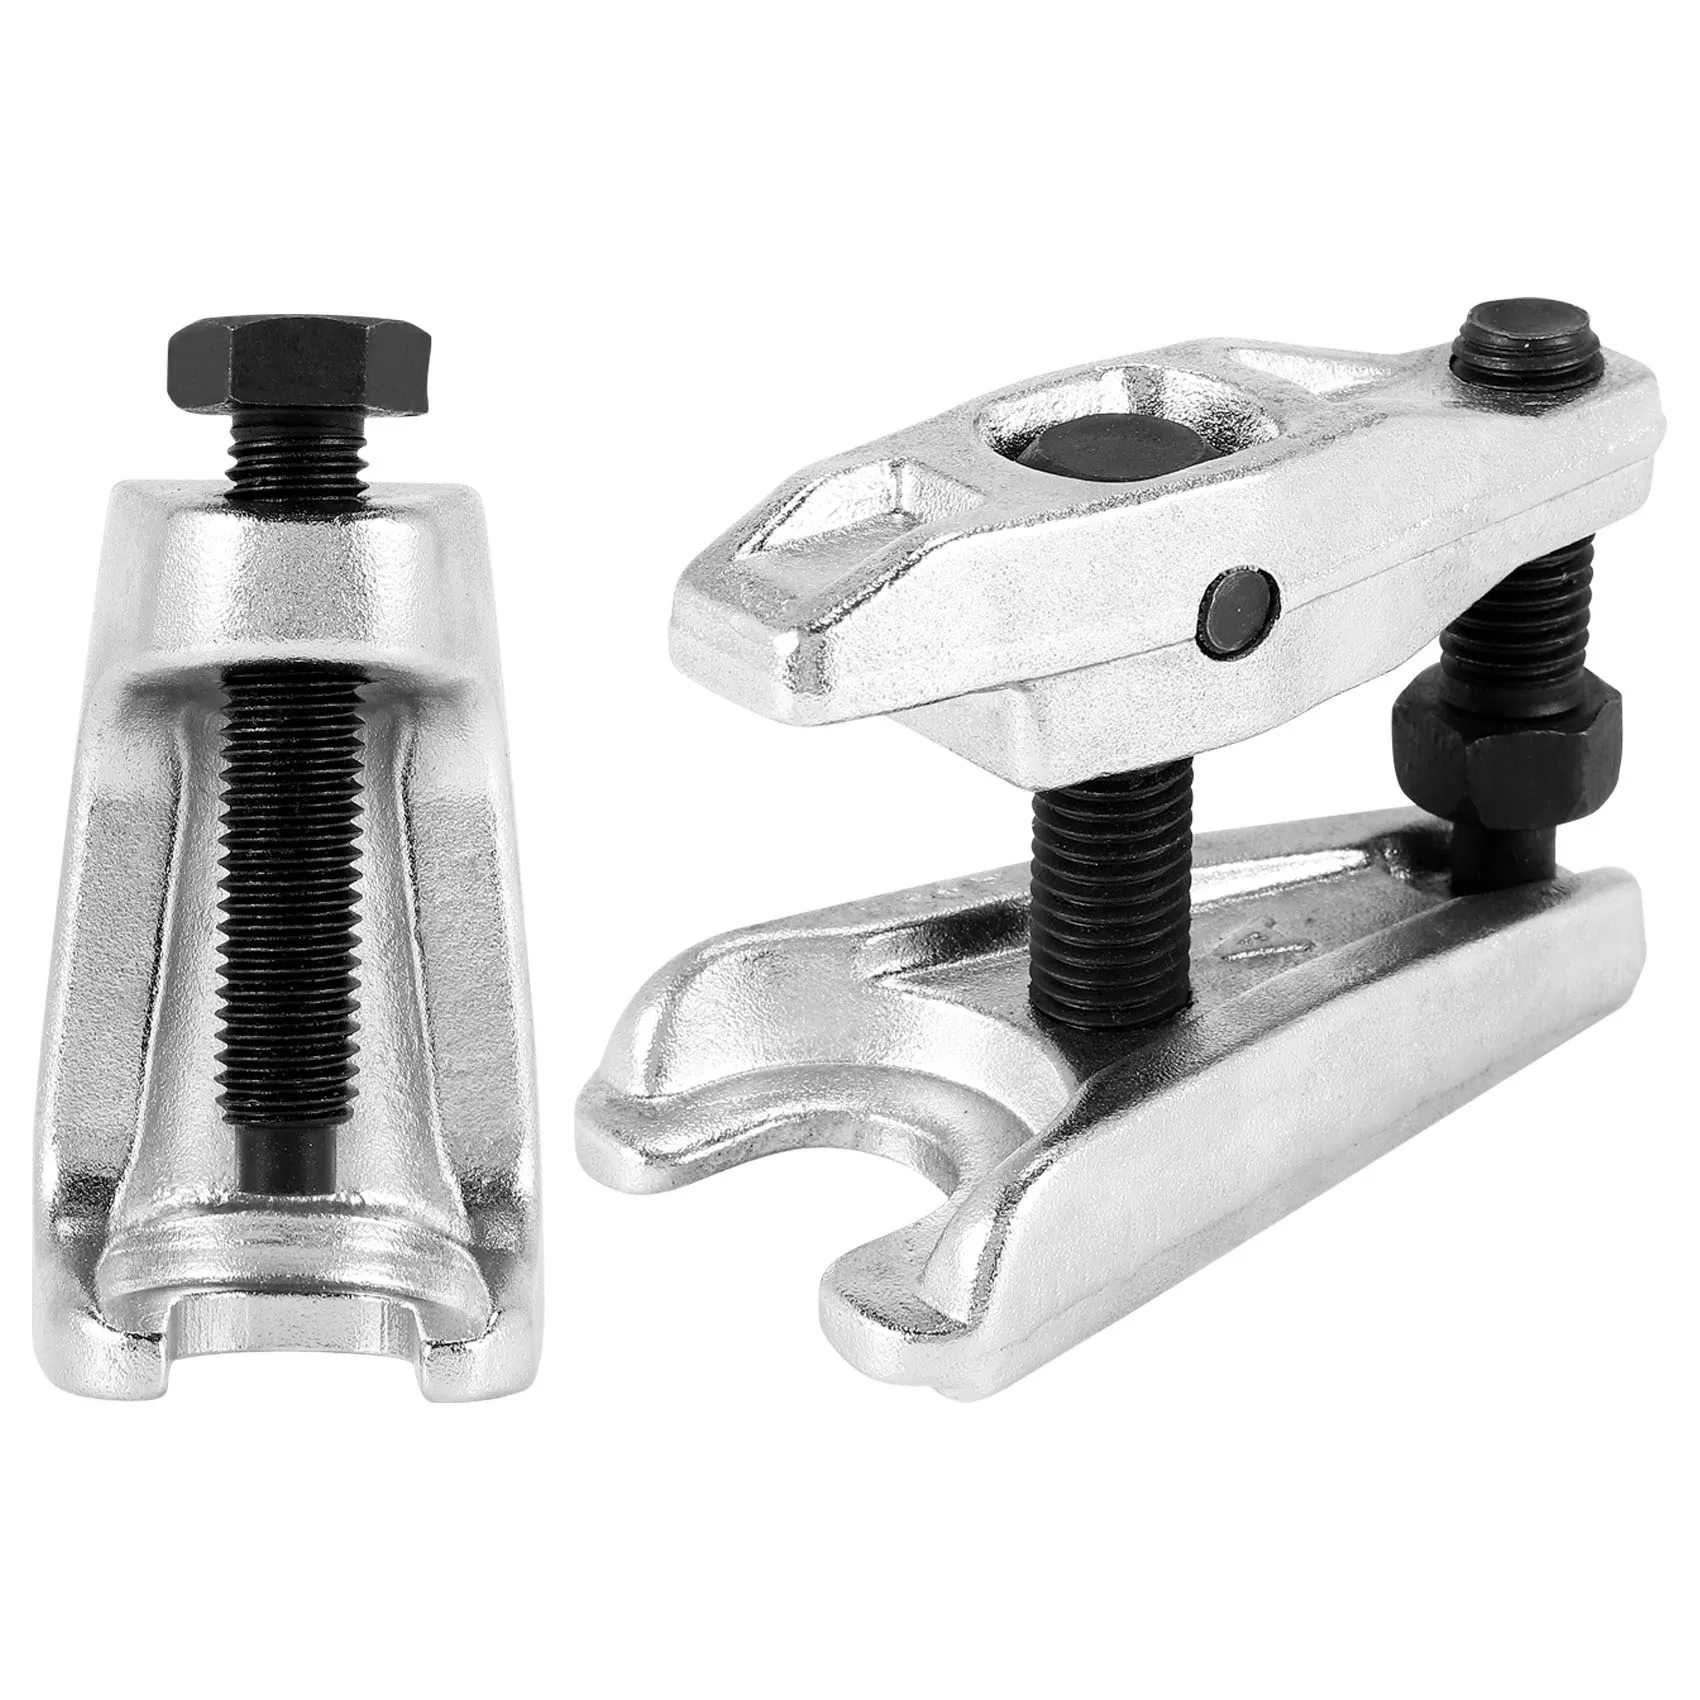 

Adjustable Ball Joint Separator Car Ball Joint Puller Removal Tool 2pcs/lot Automoitve Steering System Tools Garage Work